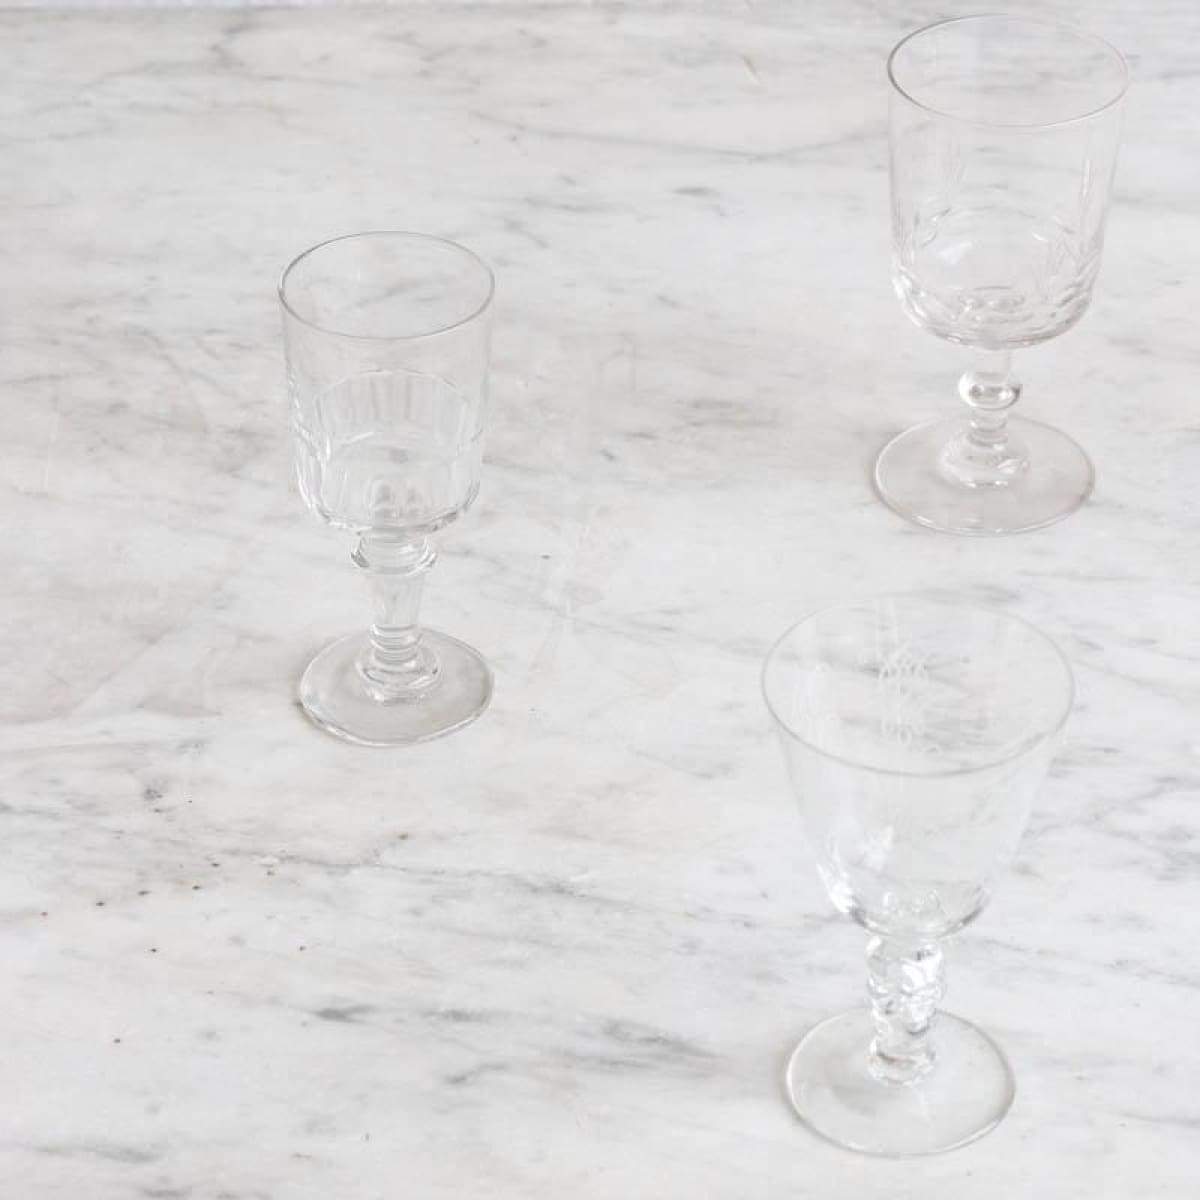 https://elsiegreen.com/cdn/shop/products/pair-of-glamorous-vintage-aperitifs-the-french-kitchen-aperitif-appertif-glasses-champagne-coupe-coupes-glass-white-stemware-drinkware-247.jpg?v=1651609183